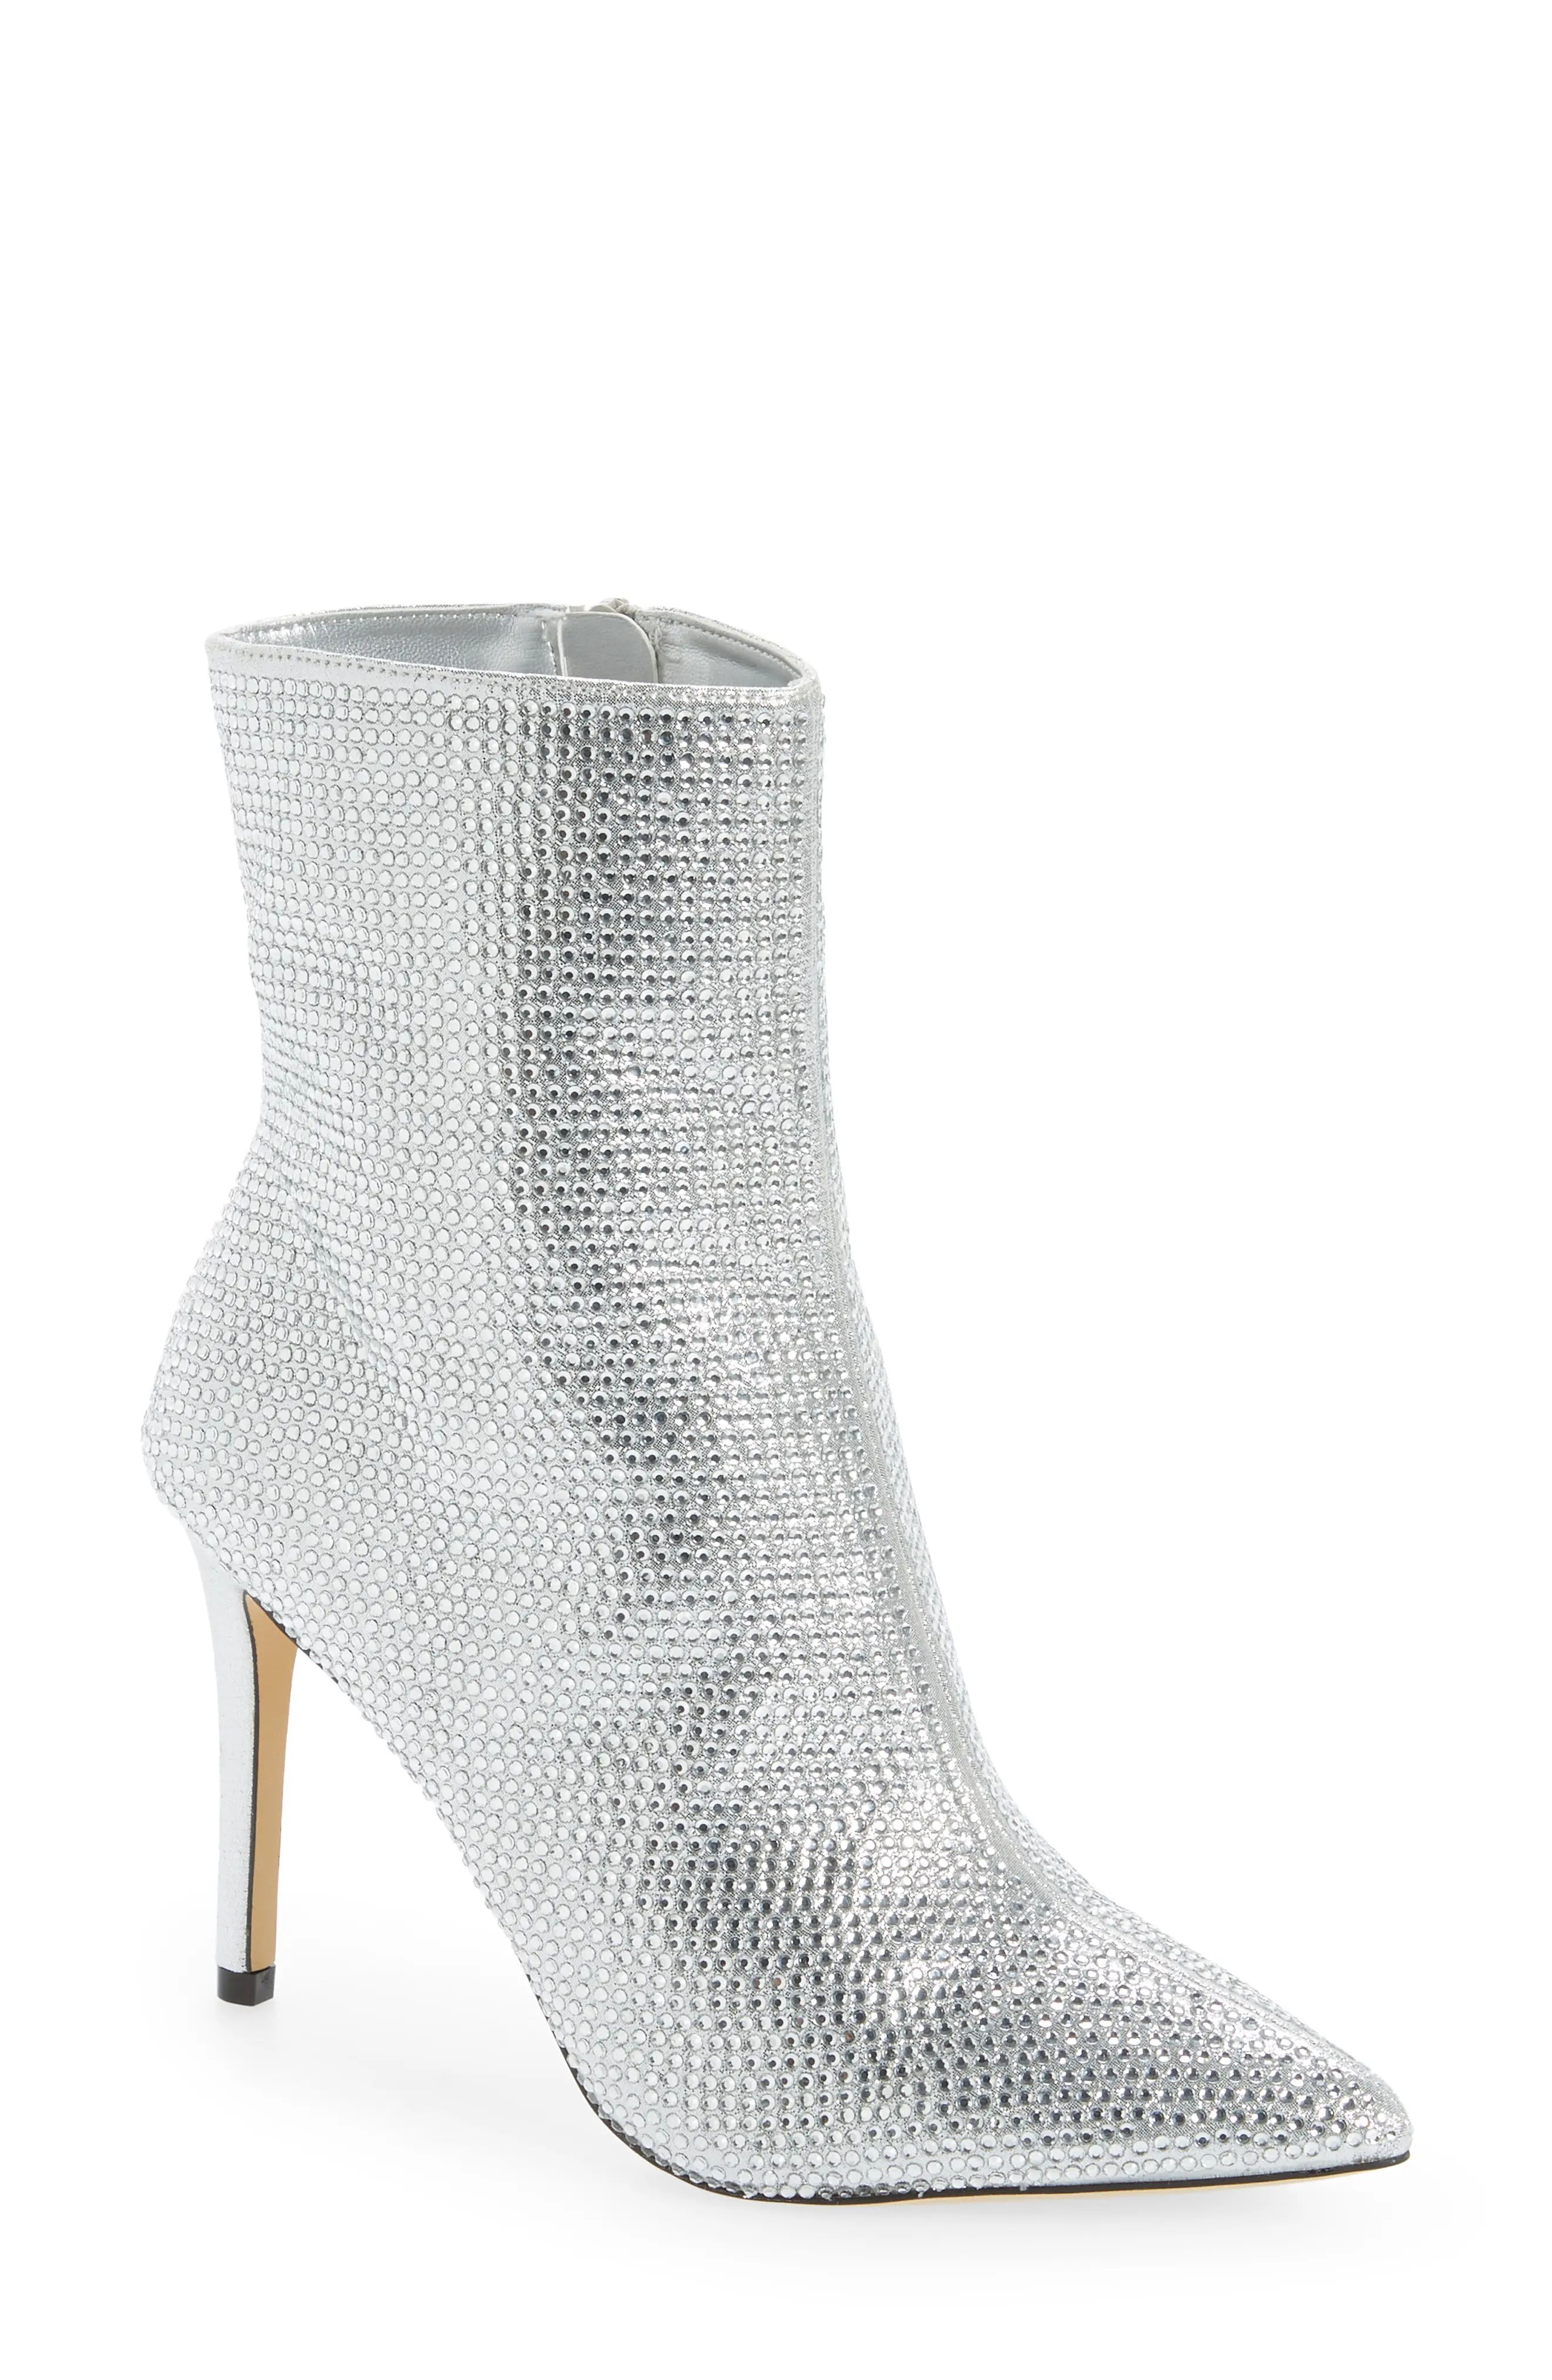 BP. Athenna Crystal Bootie, Size 12 in Silver Heat Seal at Nordstrom | Nordstrom